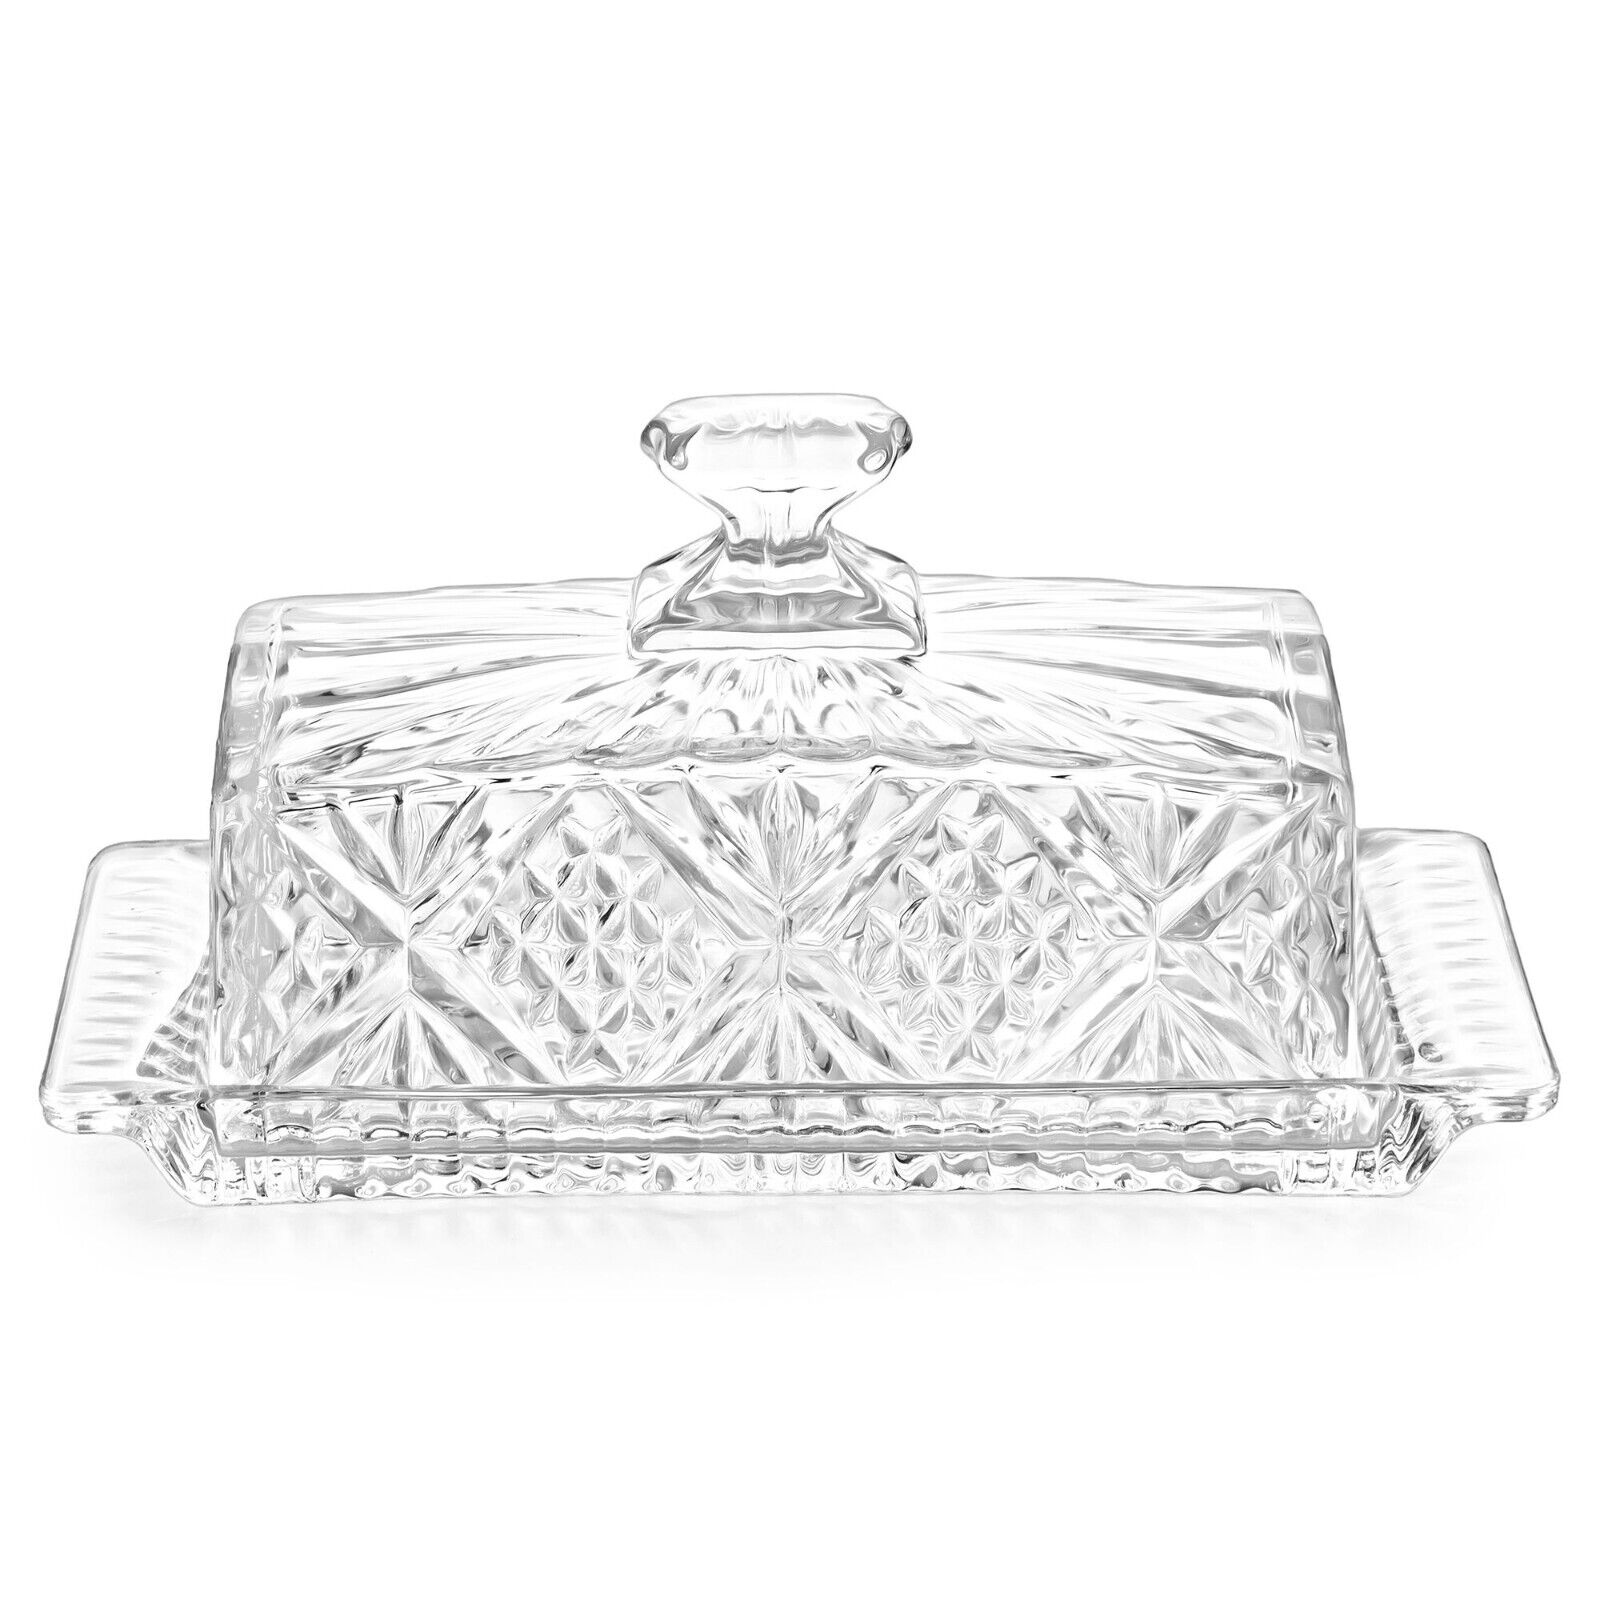 Dublin Crystal Glass Butter Dish w/ Lid Vintage Covered Butter Keeper Clear 8x4